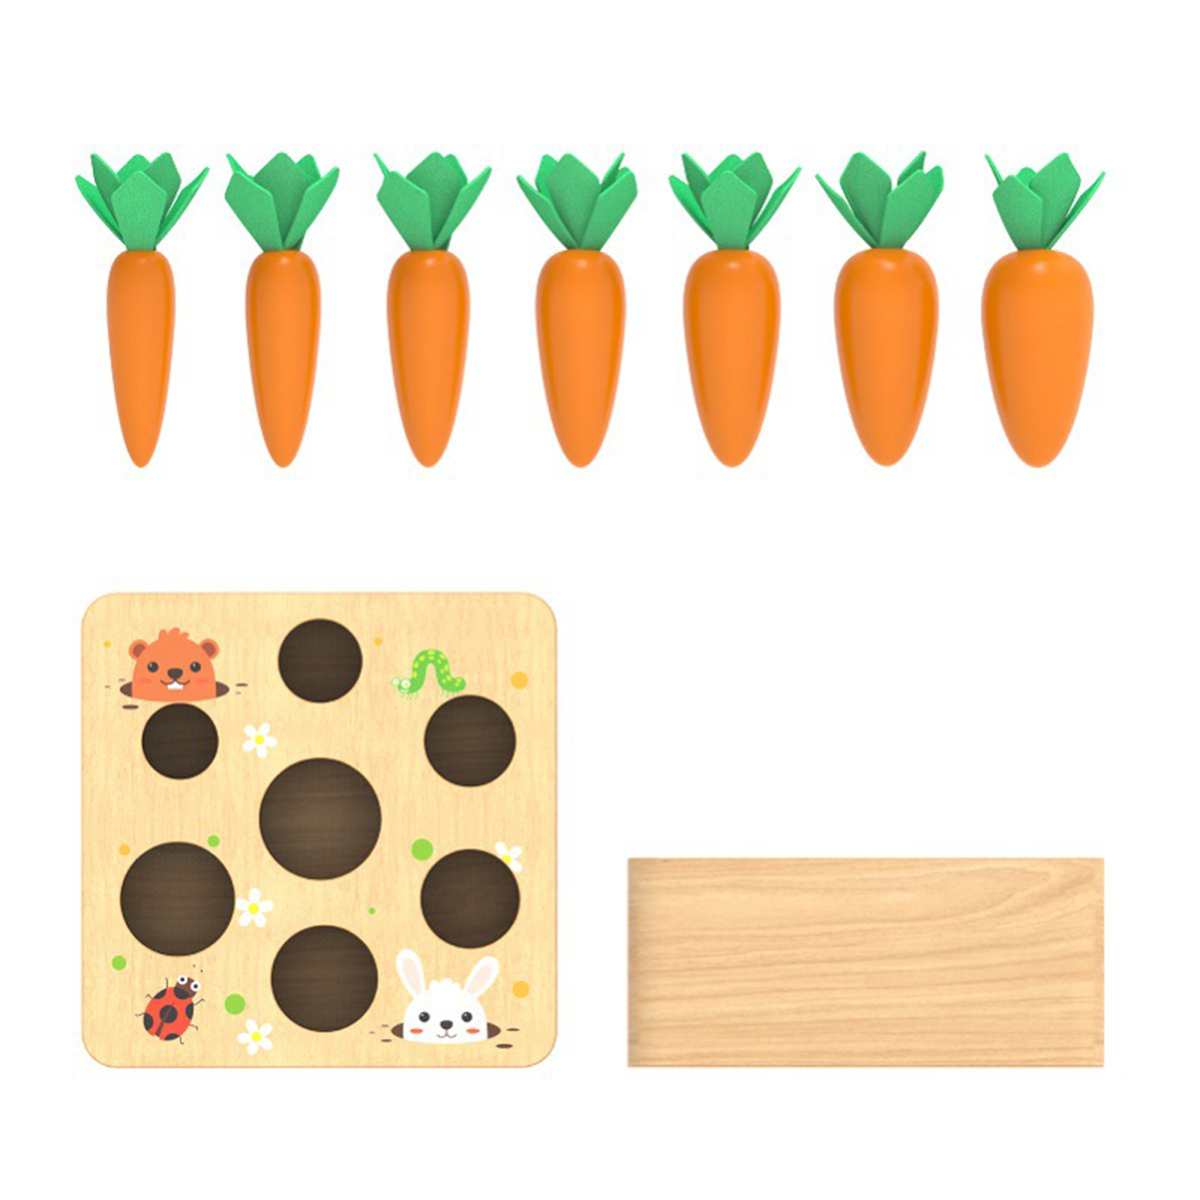 Kids-Wooden-Building-Blocks-Pulling-Carrot-Game-Children-Early-Educational-Toys-1676982-7